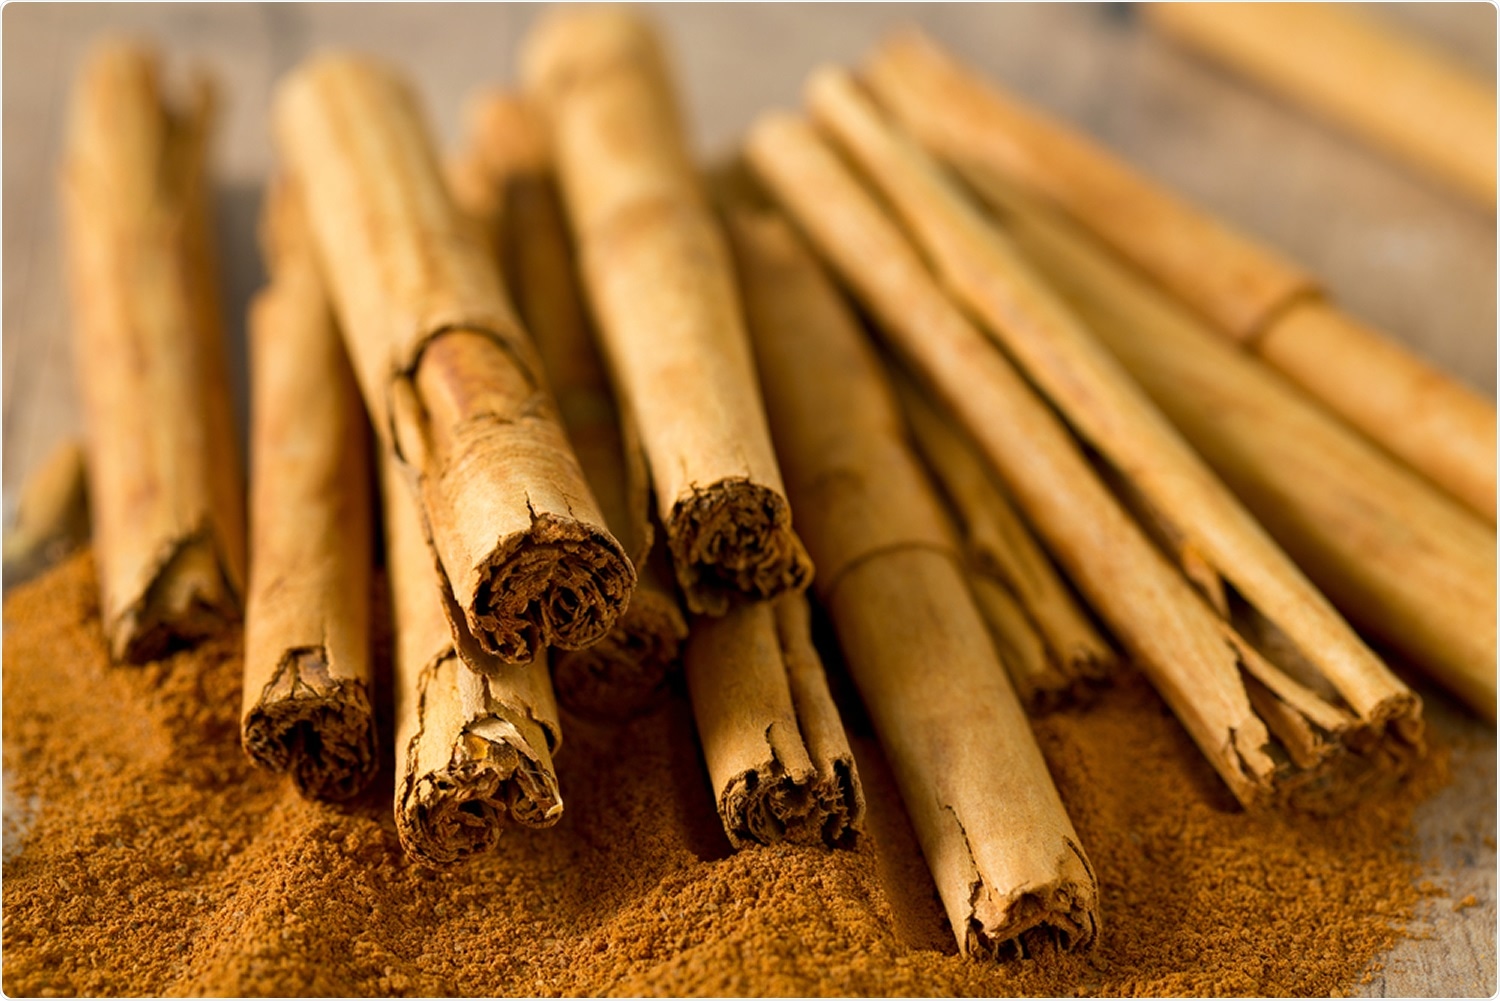 Study: Ceylon cinnamon and its major compound Cinnamaldehyde can limit overshooting inflammatory signaling and angiogenesis in vitro: implications for COVID-19 treatment. Image Credit: Chatham172 / Shutterstock